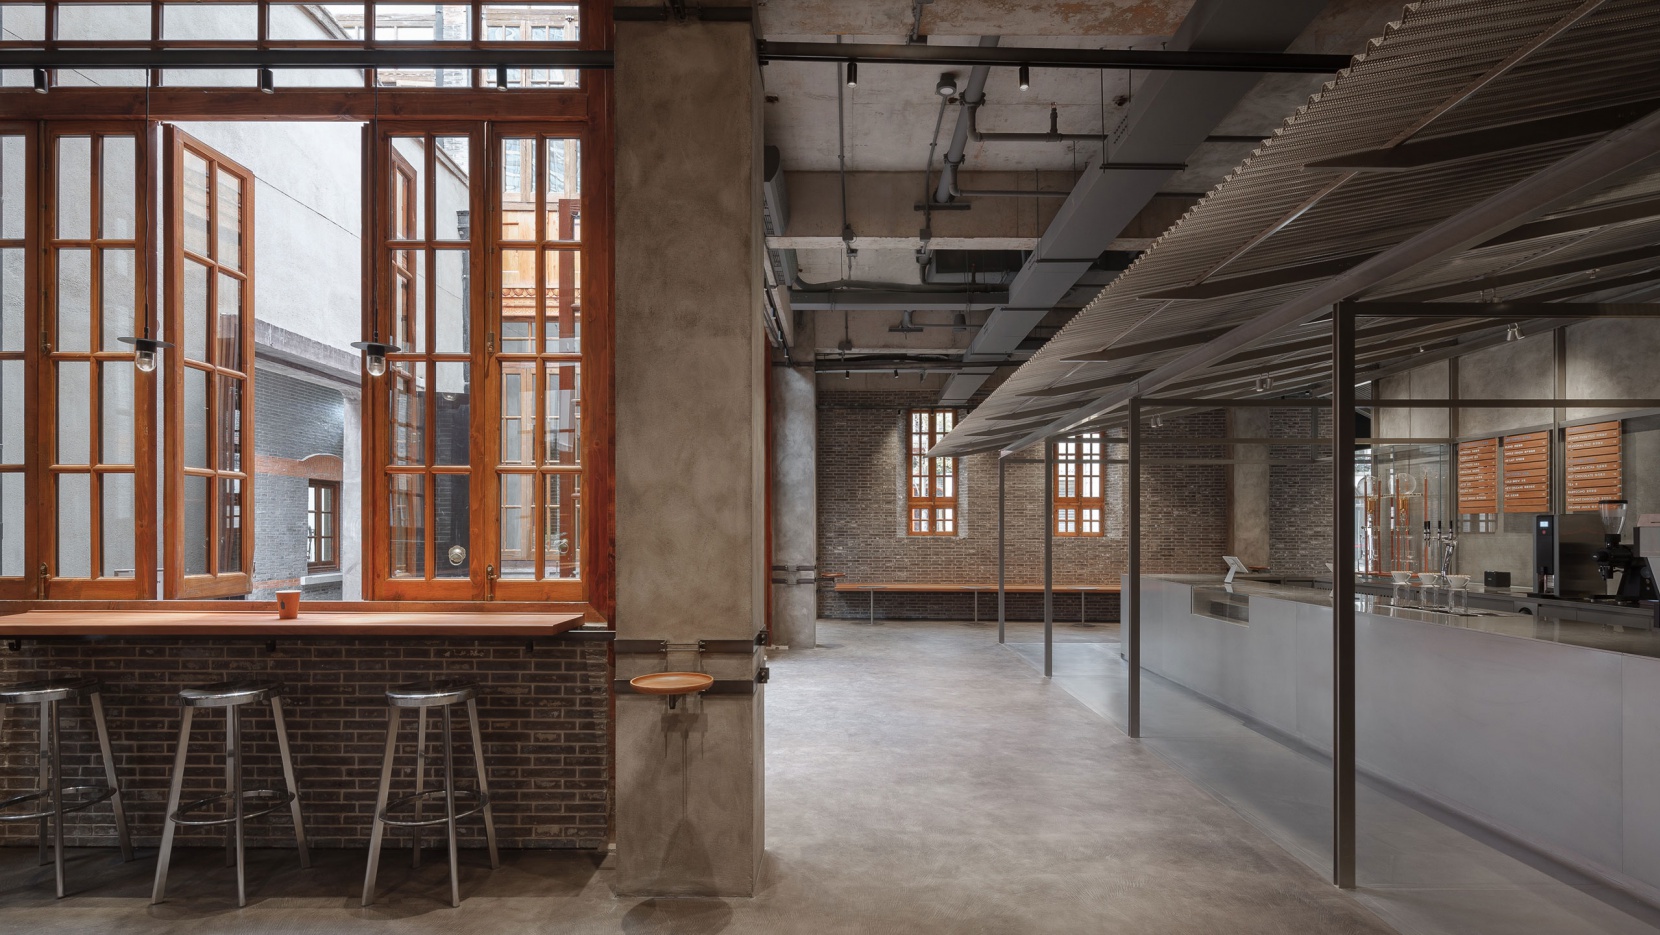 Traditional Chinese roof tiles decorate Blue Bottle Coffee shop in Shanghai